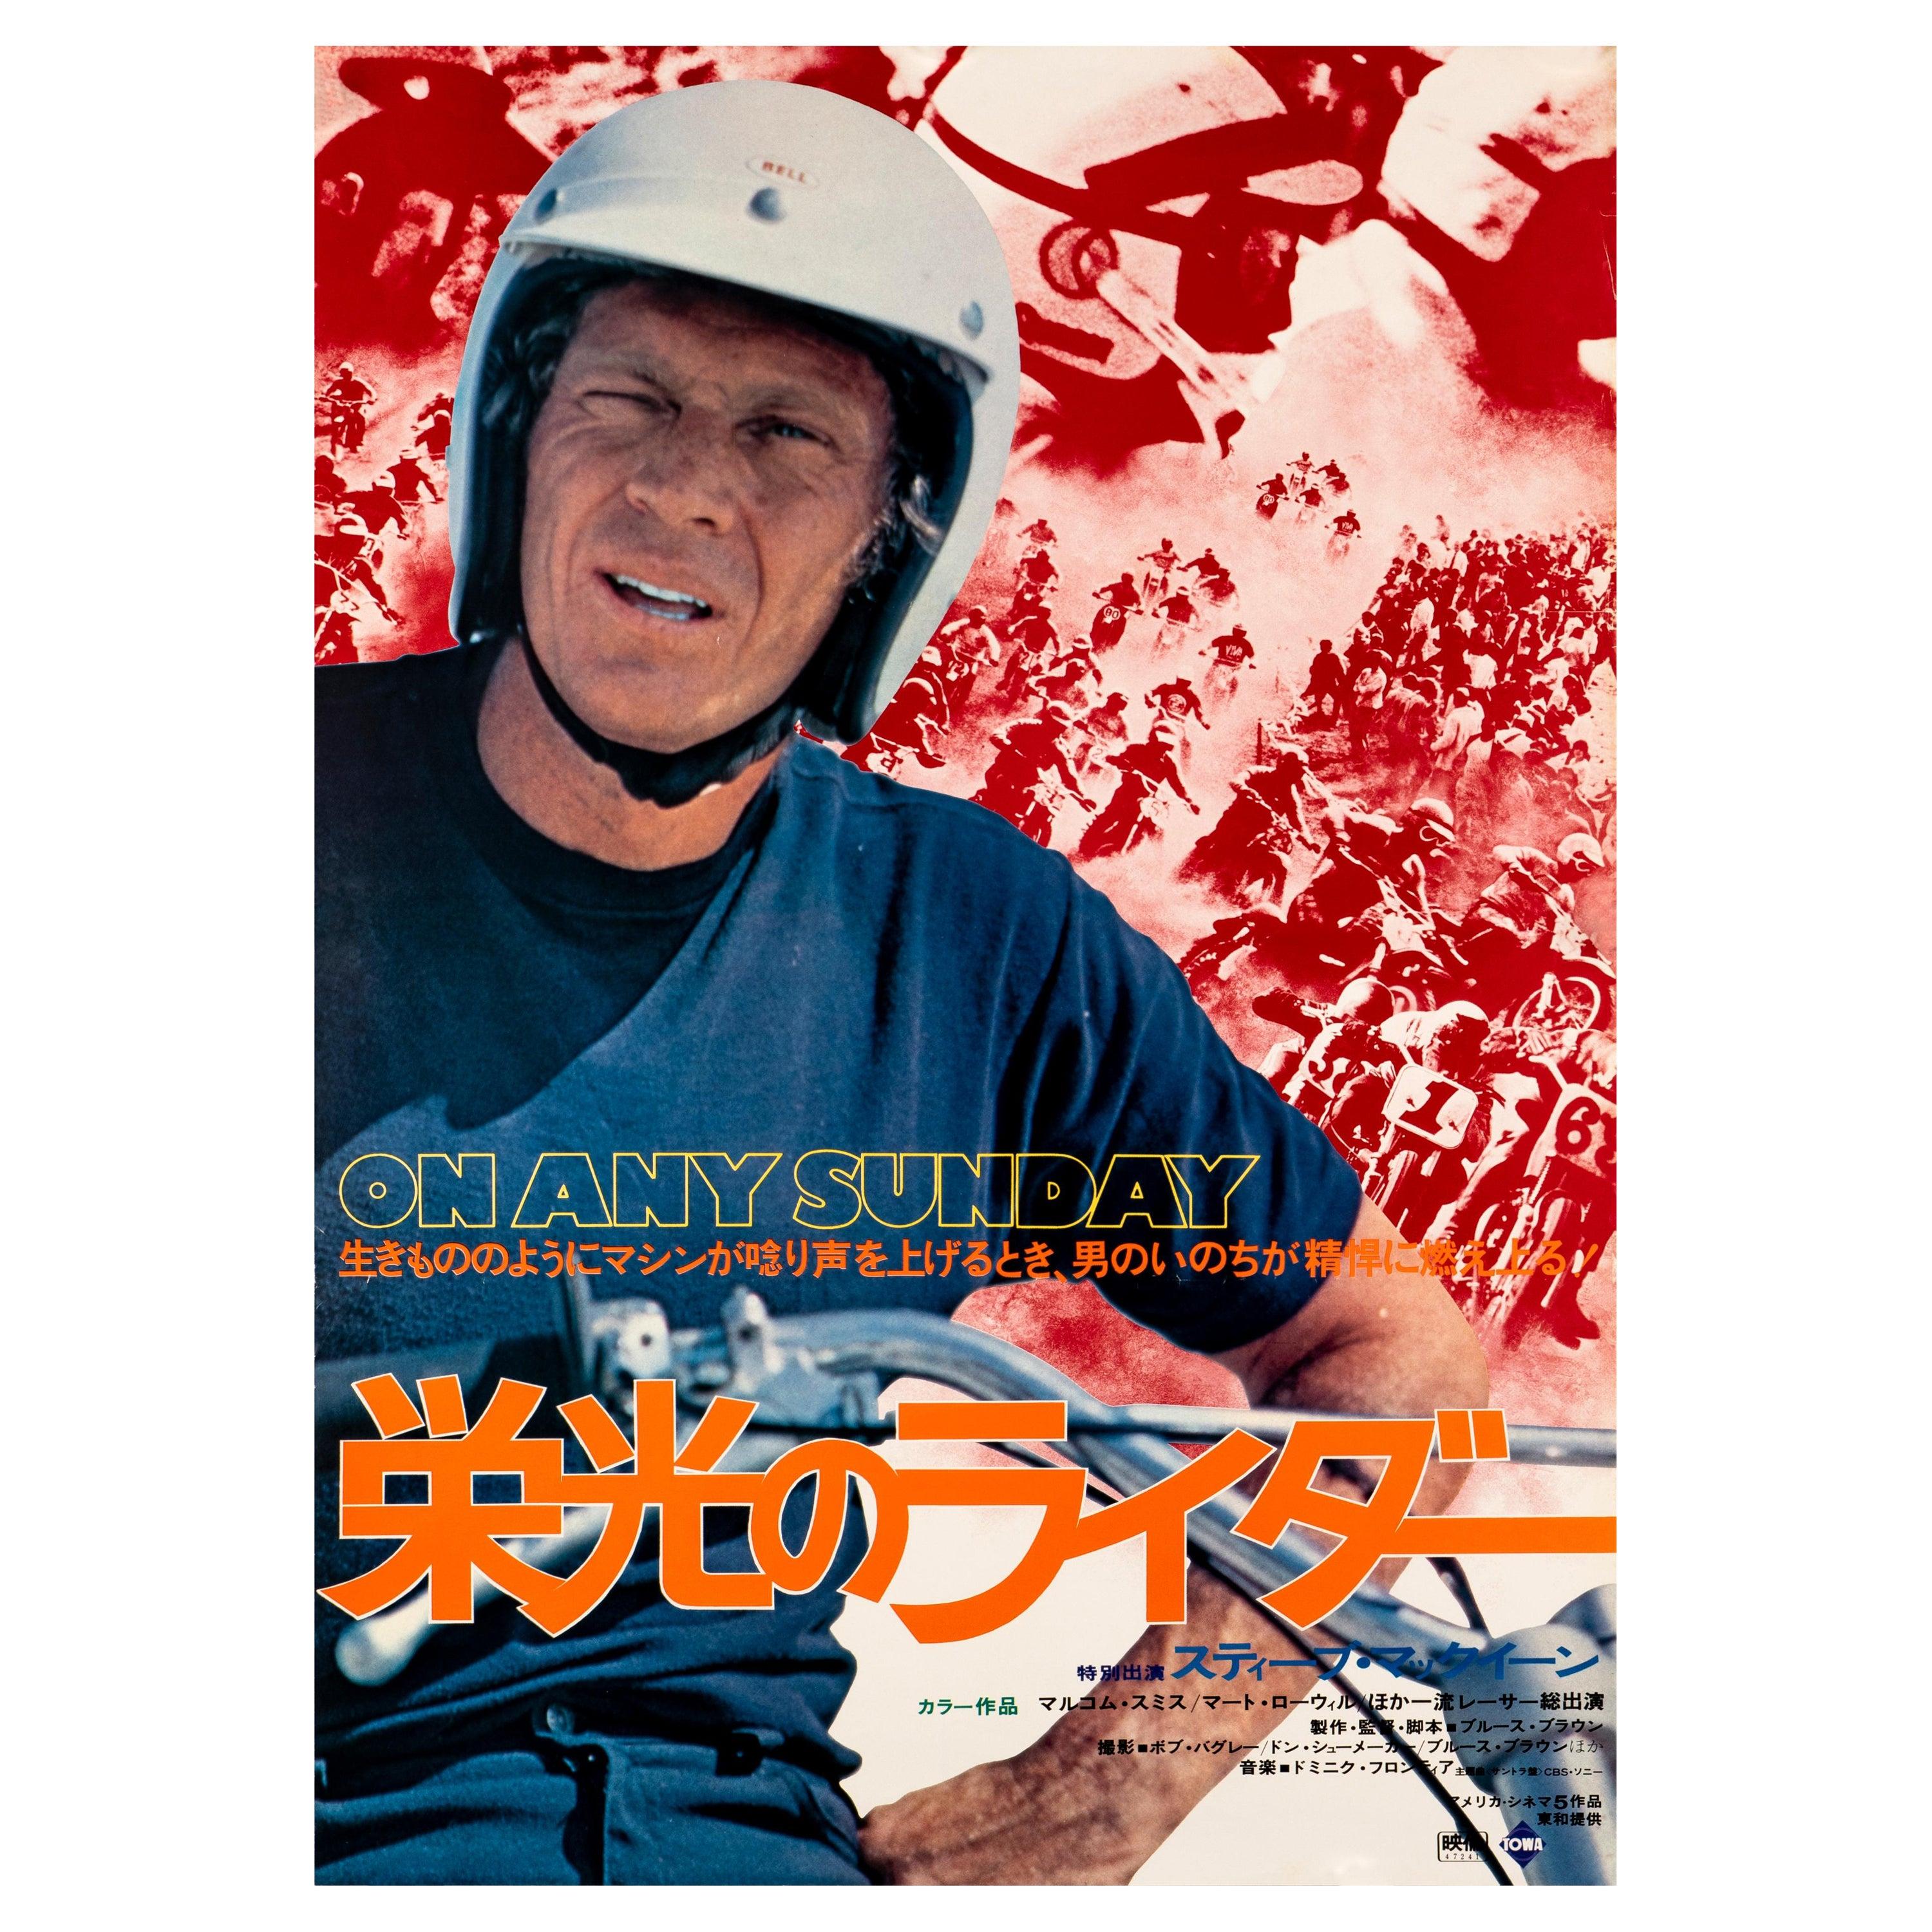 Steve McQueen 'On Any Sunday' Original Vintage Japanese B2 Movie Poster, 1972 - Art by Unknown